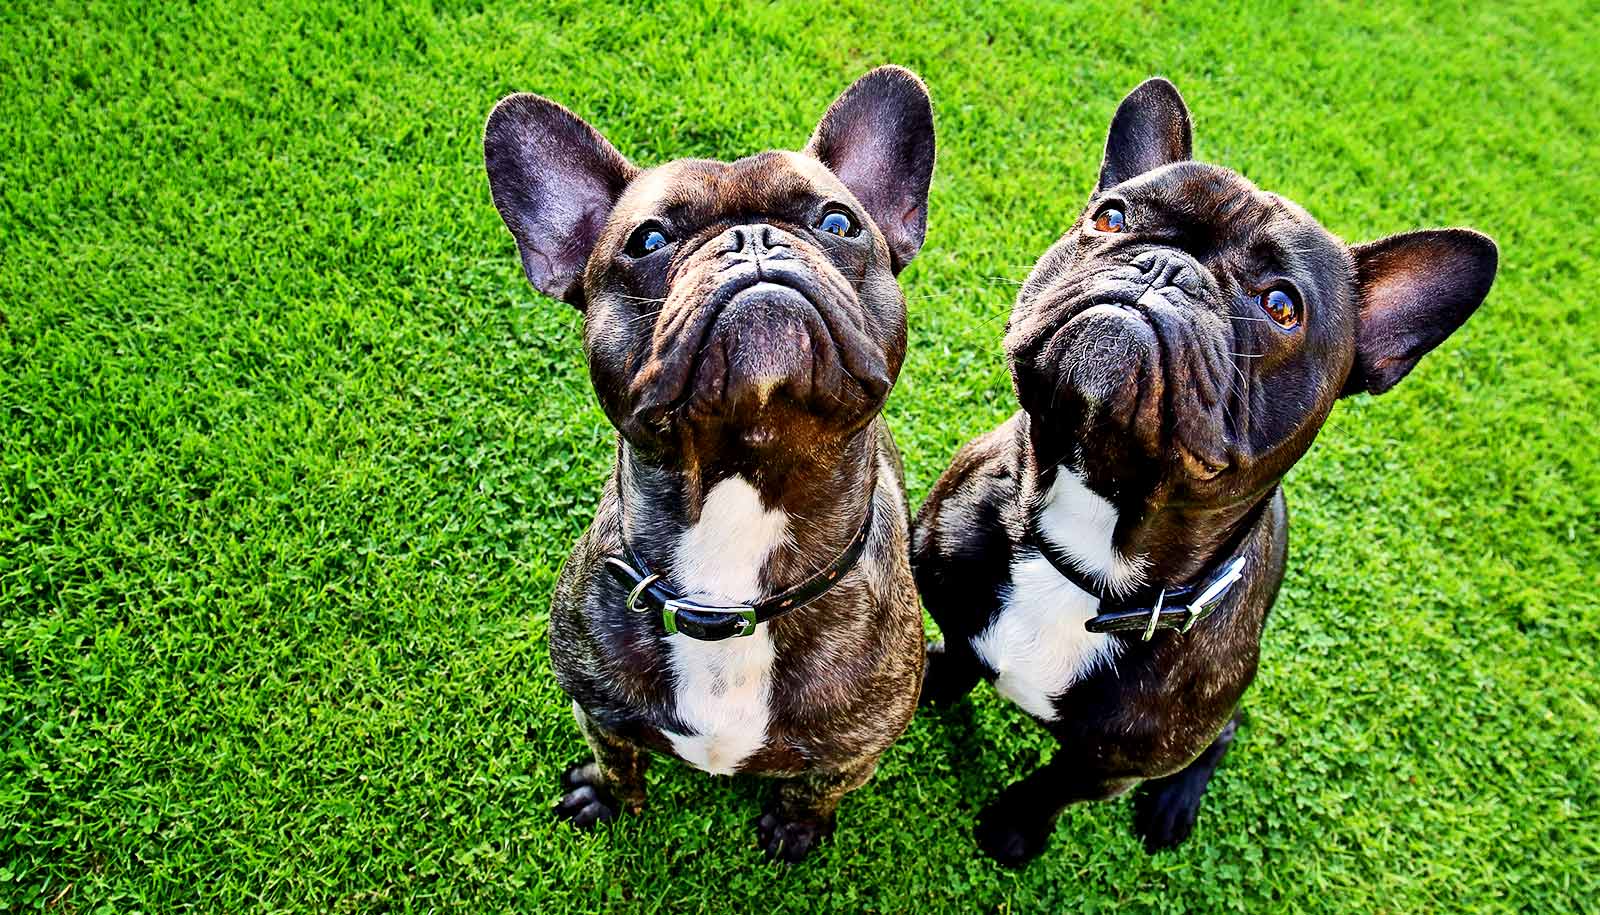 Two French bulldogs on grass look up at the camera.